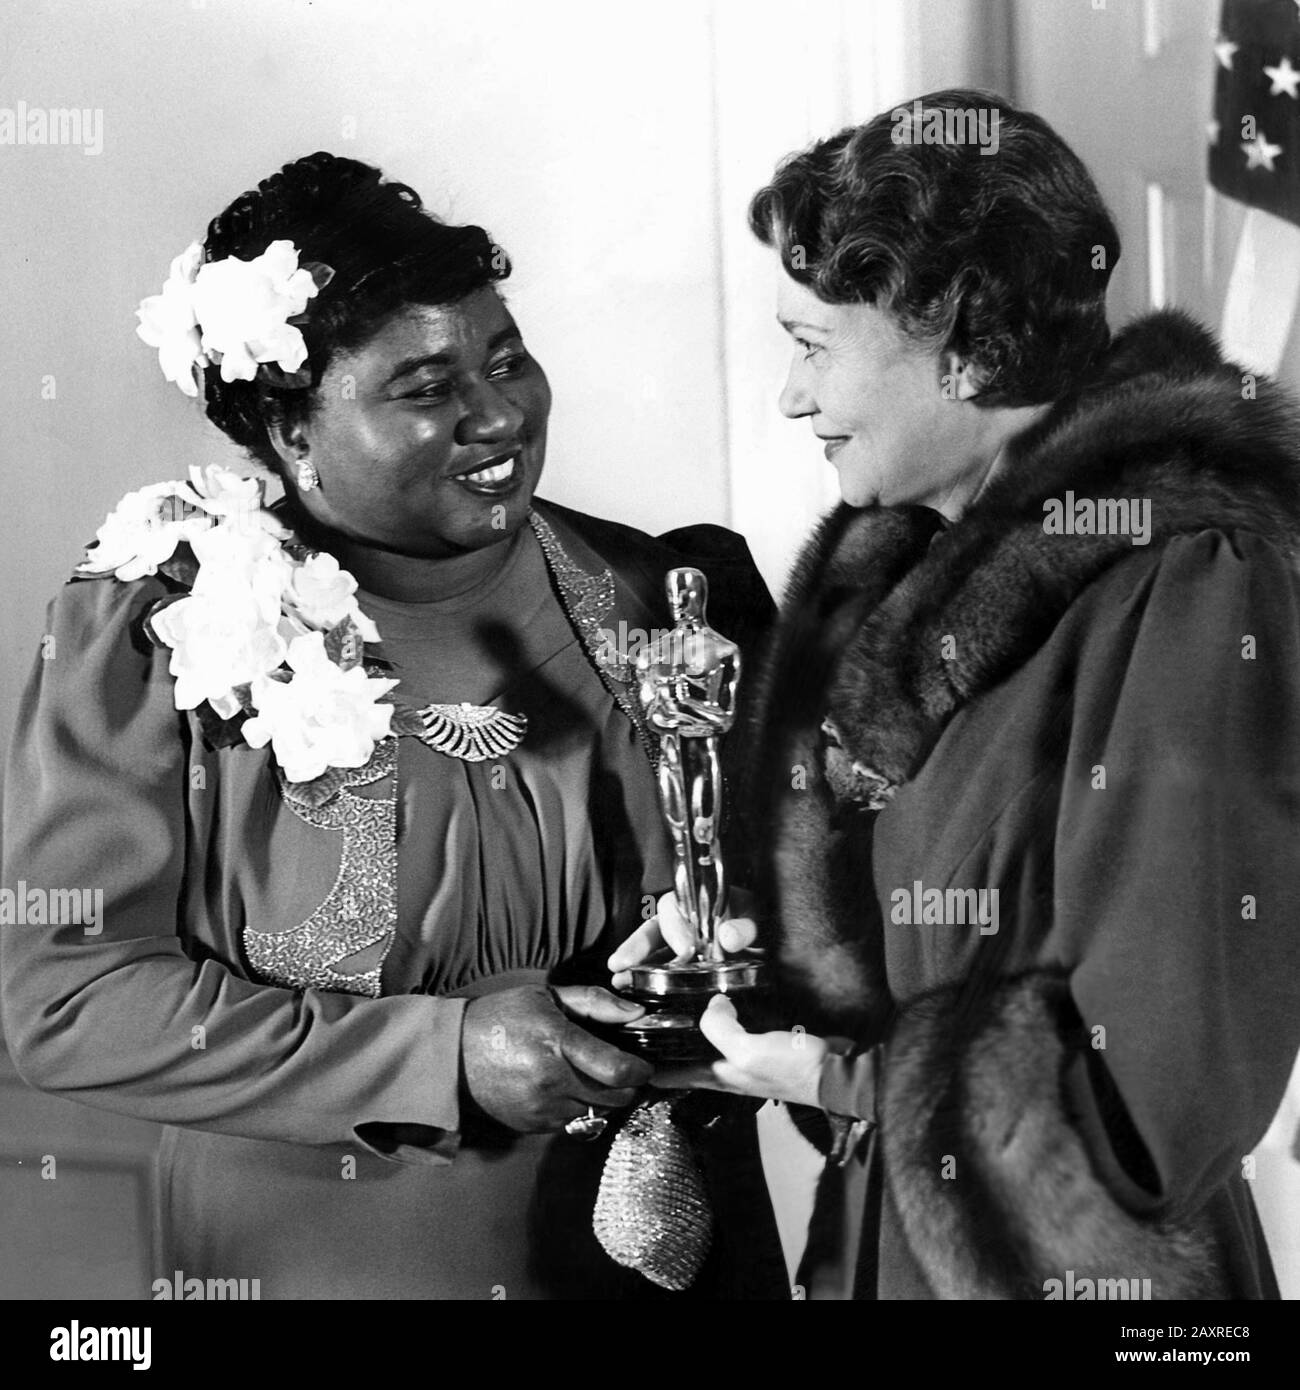 1940 , USA : HATTIE McDANIEL ( 1892 - 1952 ) receive from actress FAY BAINTER ( 1893 - 1968 ) the Oscar Award, at 1939 12th Academy Awards , for her role of MAMMIE  in movie GONE WITH THE WIND ( Via col Vento , 1939 ) by Victor Fleming , from the novel by Margaret Mitchell . Pubblicity Stills . - FILM - CINEMA - portrait - ritratto - FILM - premio - premiazione - statuetta - statuette - smile - sorriso ---  Archivio GBB Stock Photo